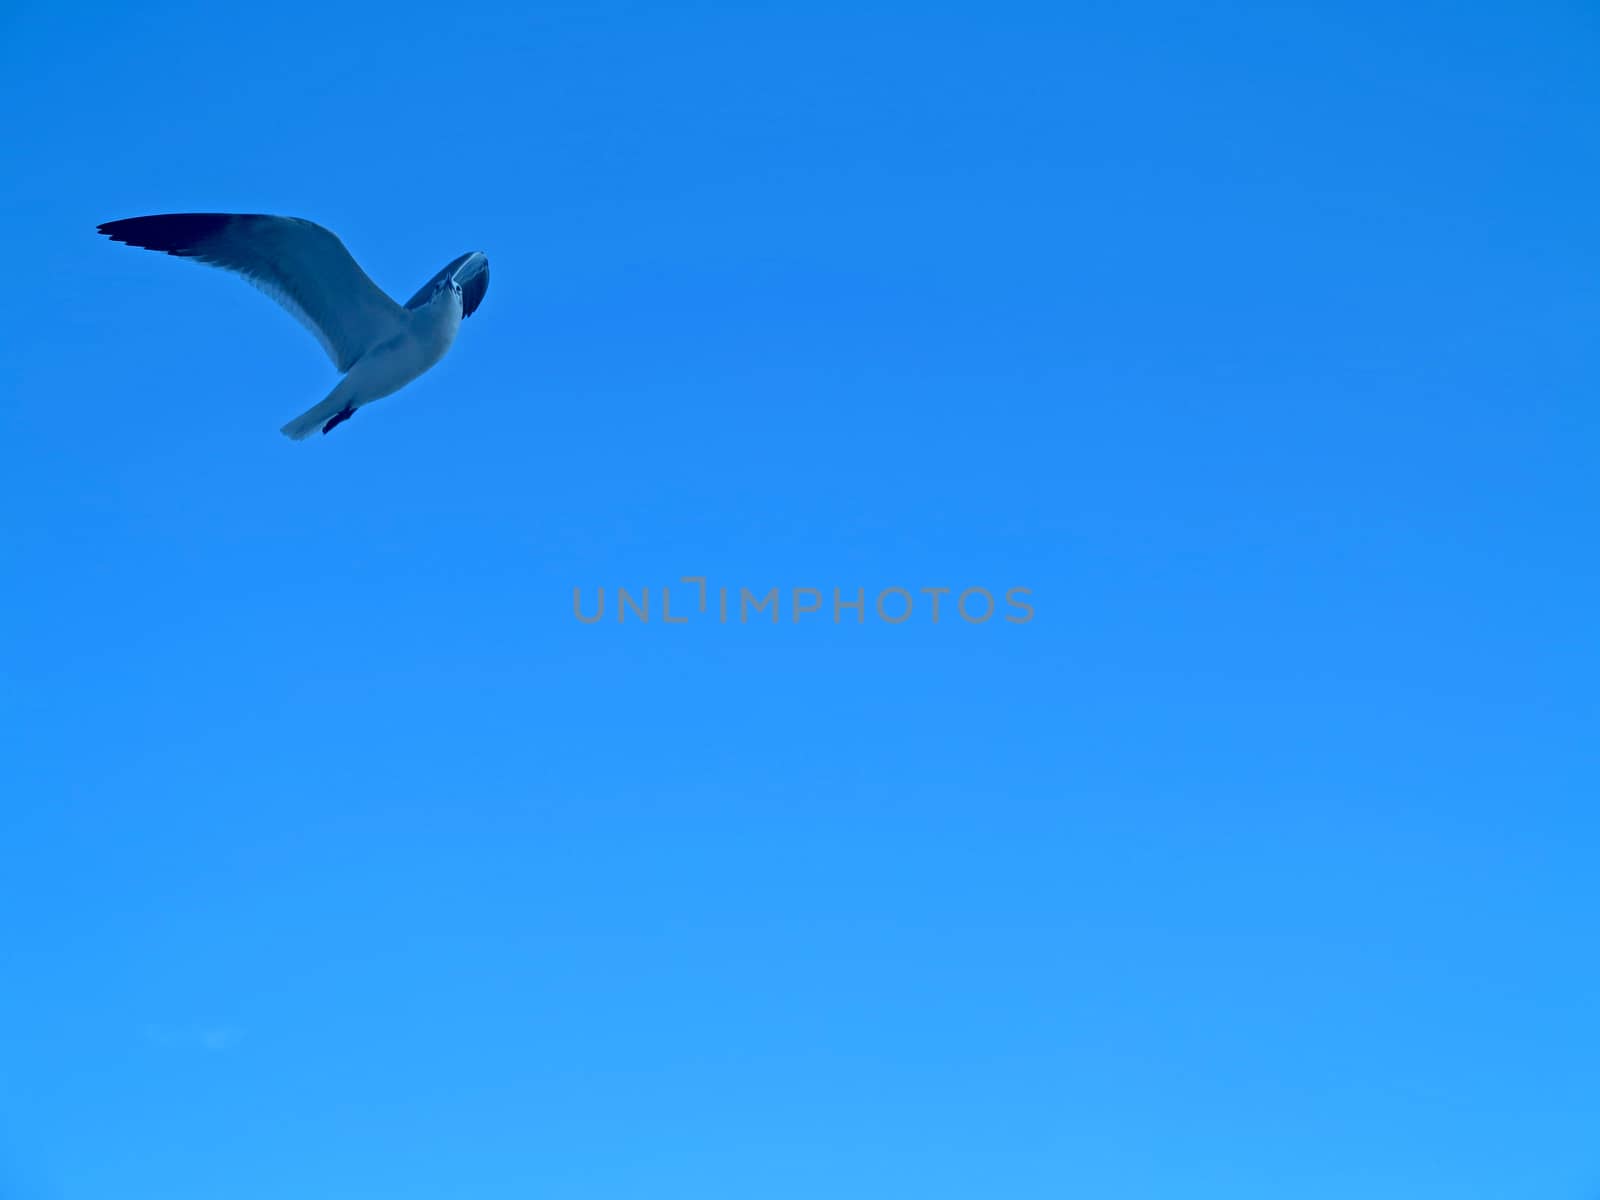 A seagull is flying through the sky